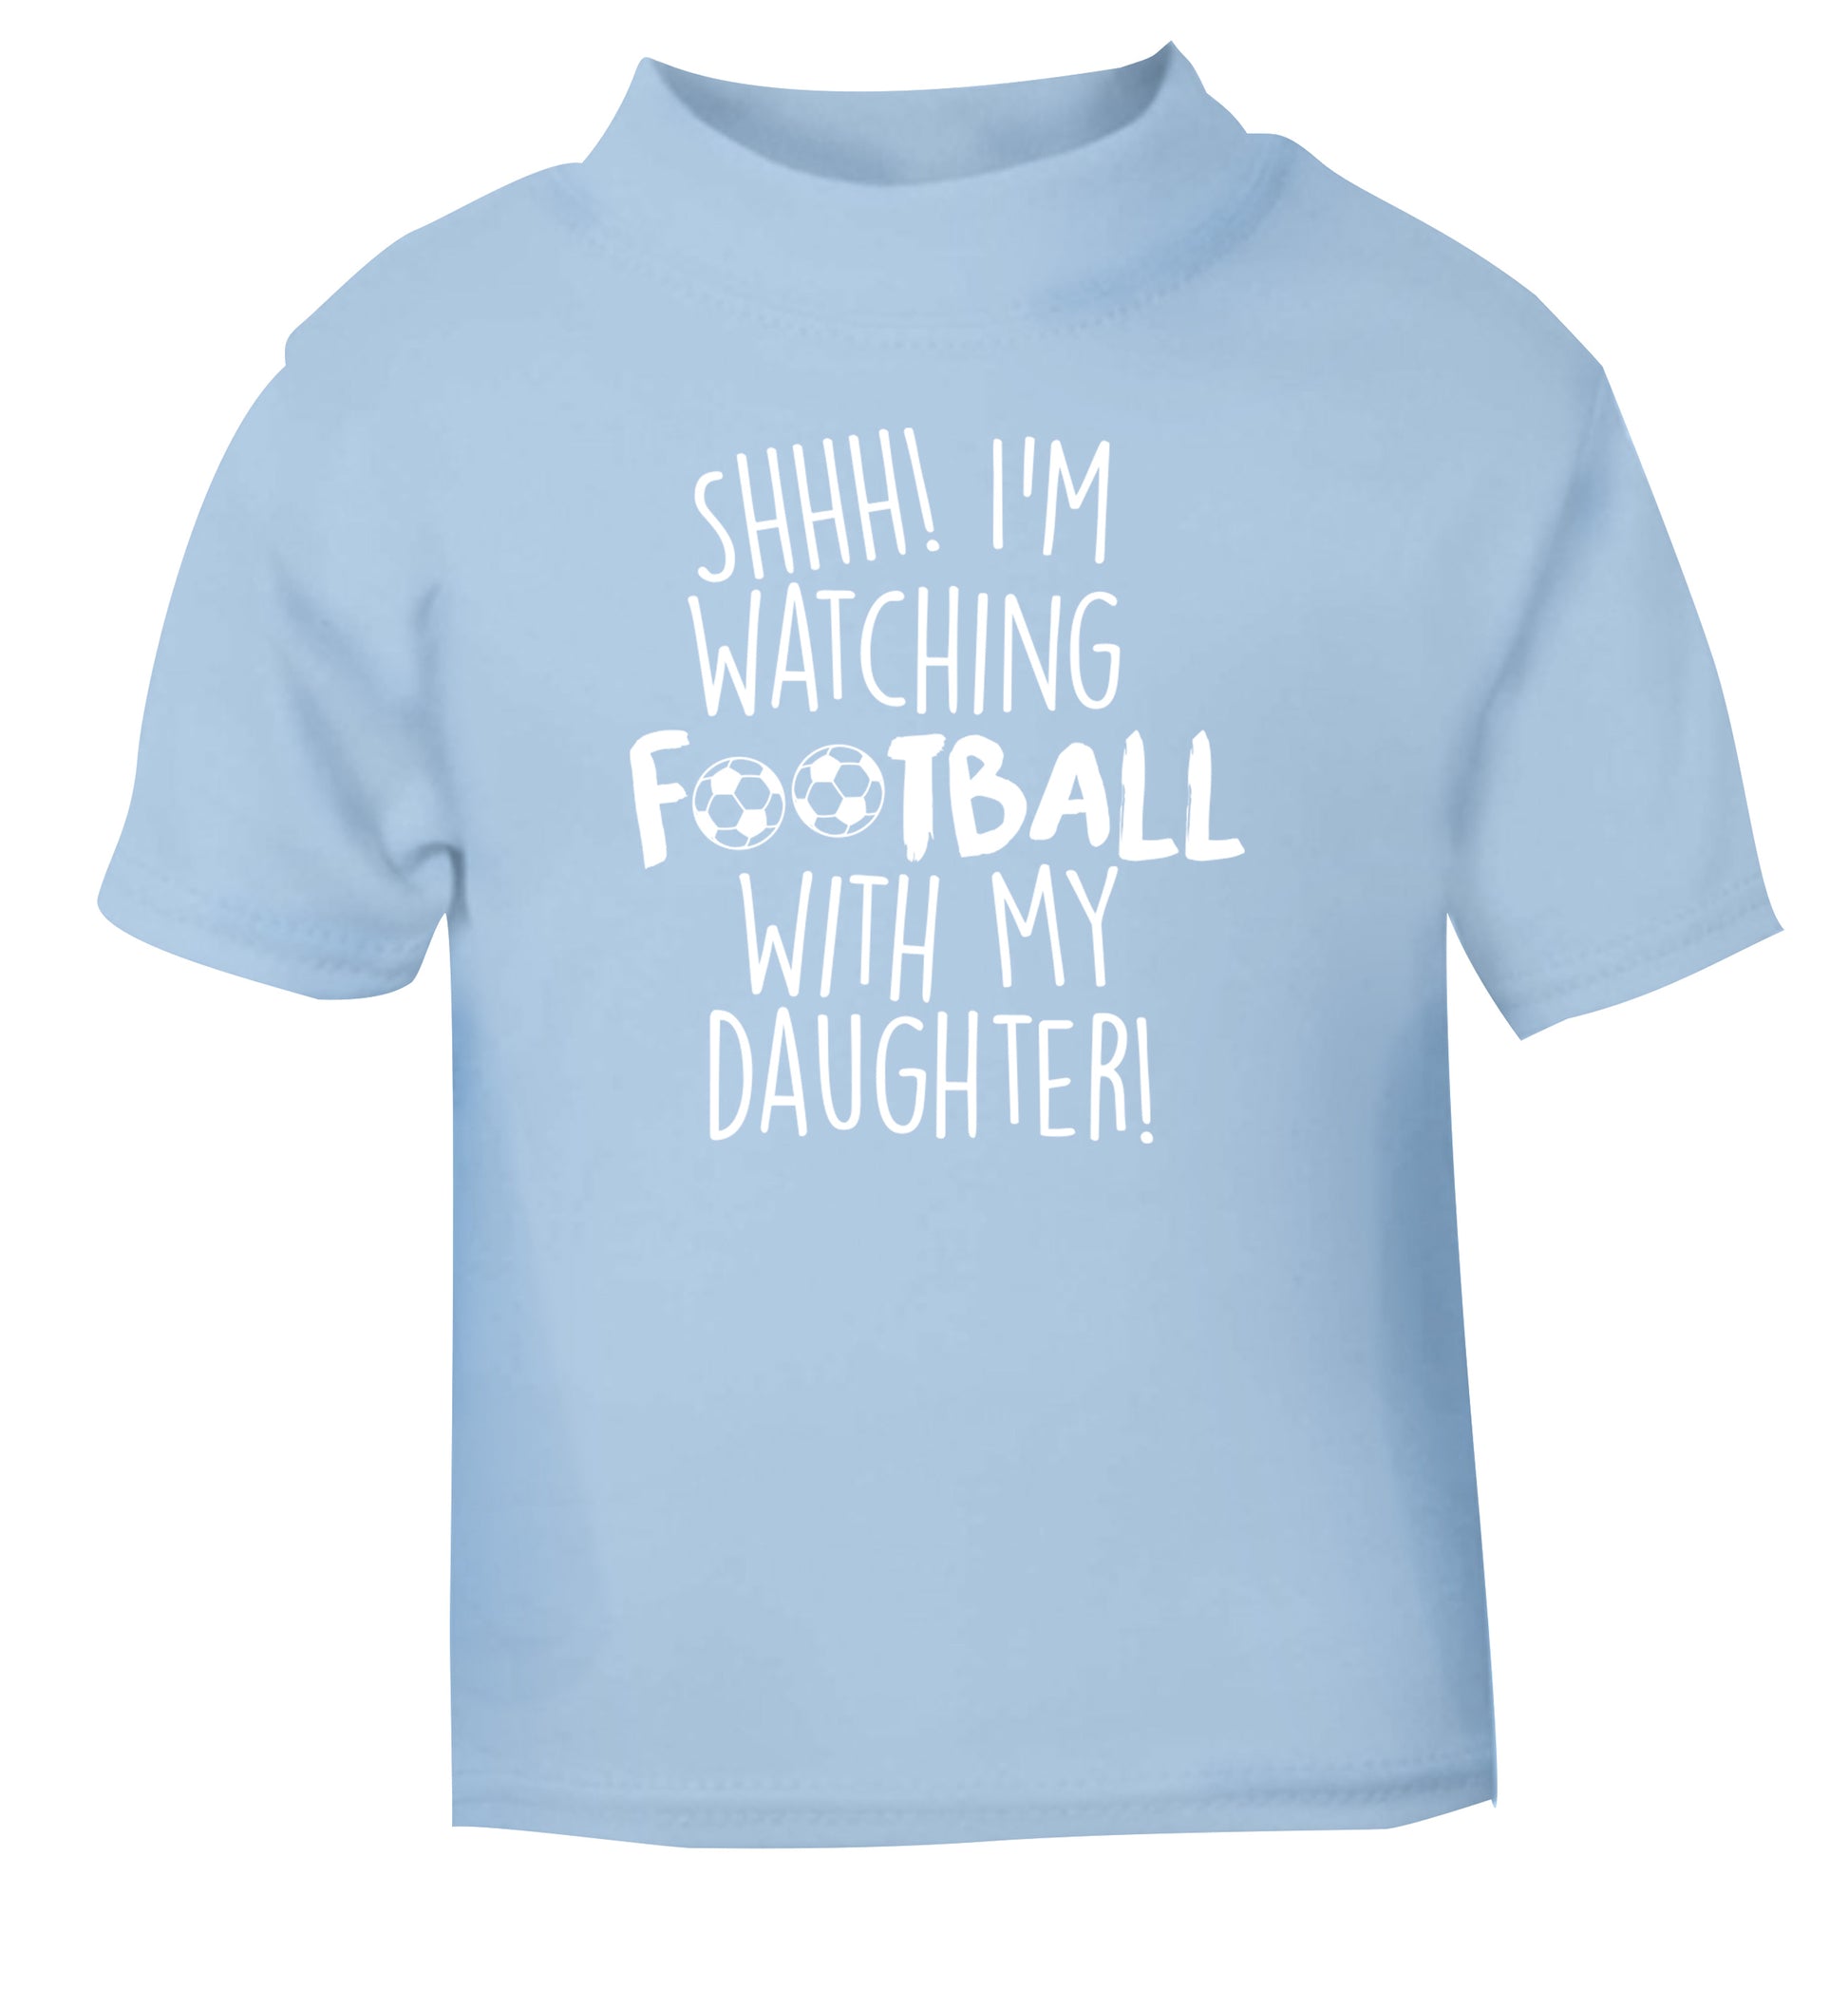 Shhh I'm watching football with my daughter light blue Baby Toddler Tshirt 2 Years